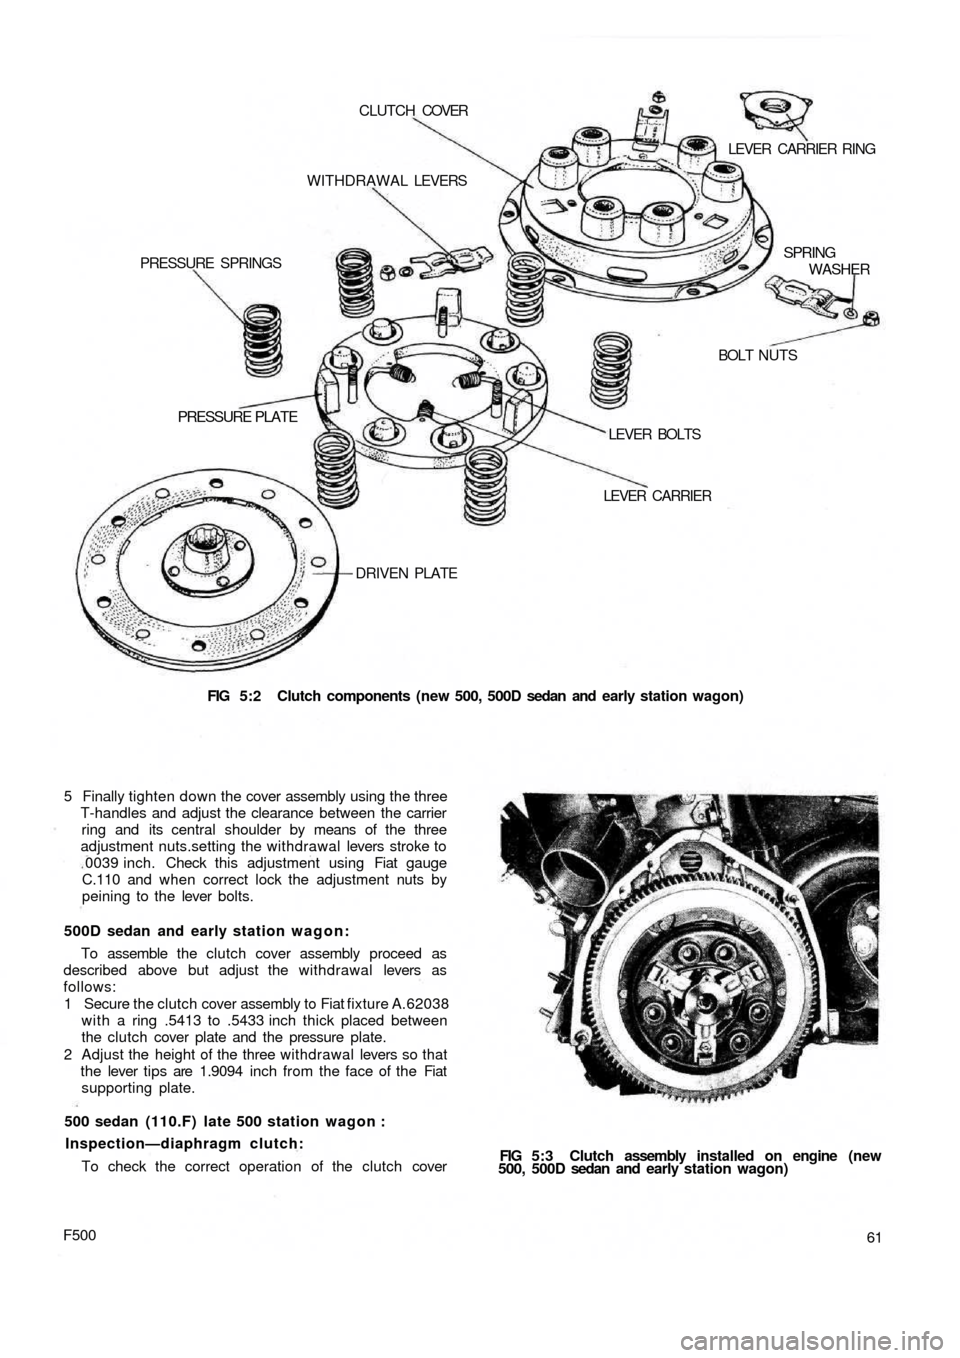 FIAT 500 1969 1.G Repair Manual FIG 5:2  Clutch components (new 500, 500D sedan  and  early station wagon) DRIVEN PLATE
PRESSURE  PLATE
LEVER  CARRIER LEVER  BOLTSBOLT NUTS PRESSURE  SPRINGSWITHDRAWAL LEVERS CLUTCH COVER
LEVER  CARR